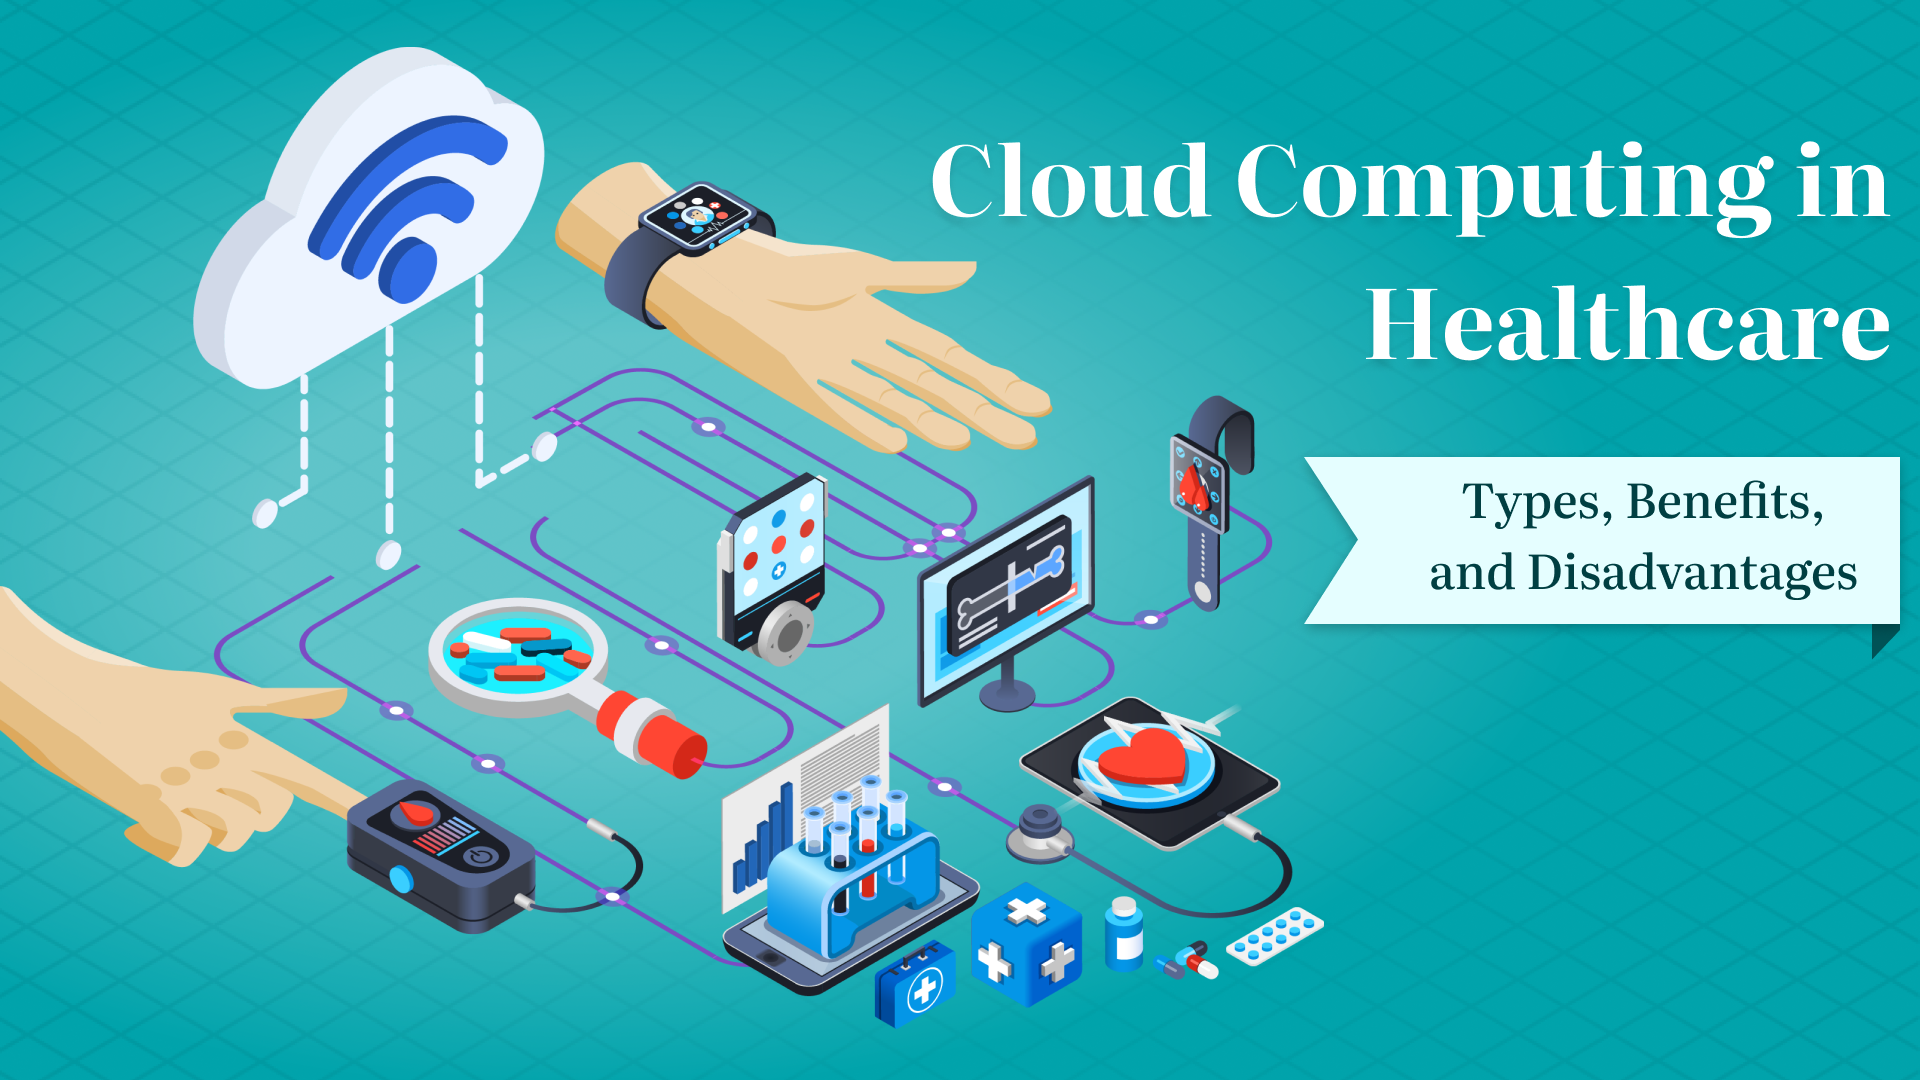 Cloud Computing in Healthcare: Types, Benefits, and Disadvantages